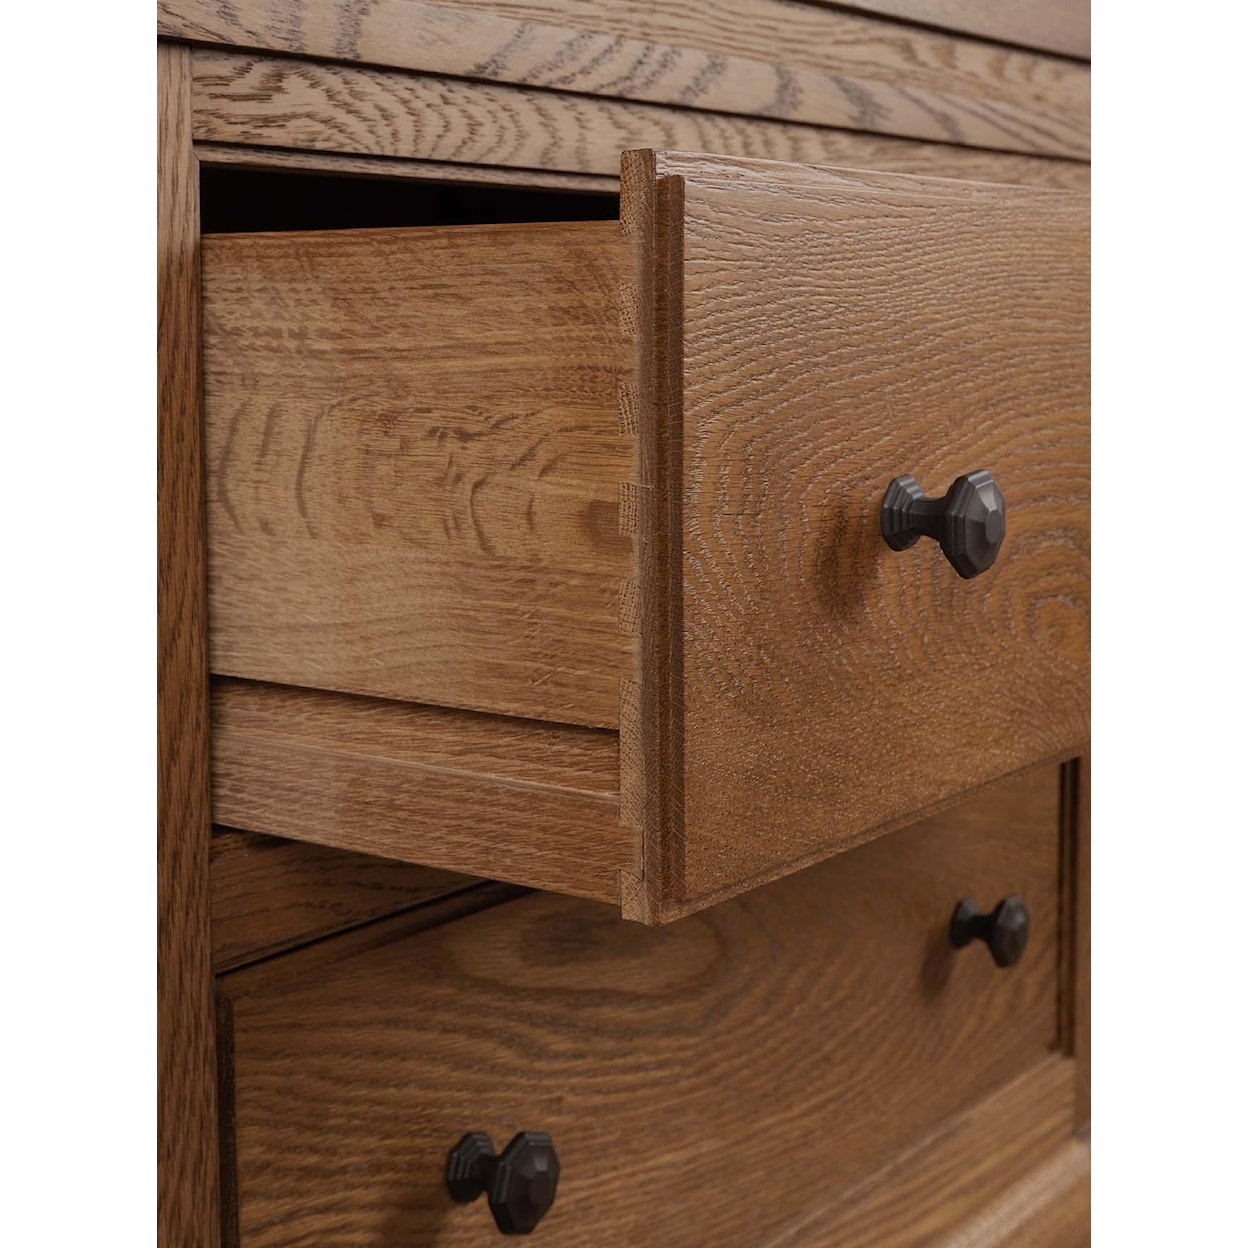 Stickley St. Lawrence St. Lawrence Nightstand